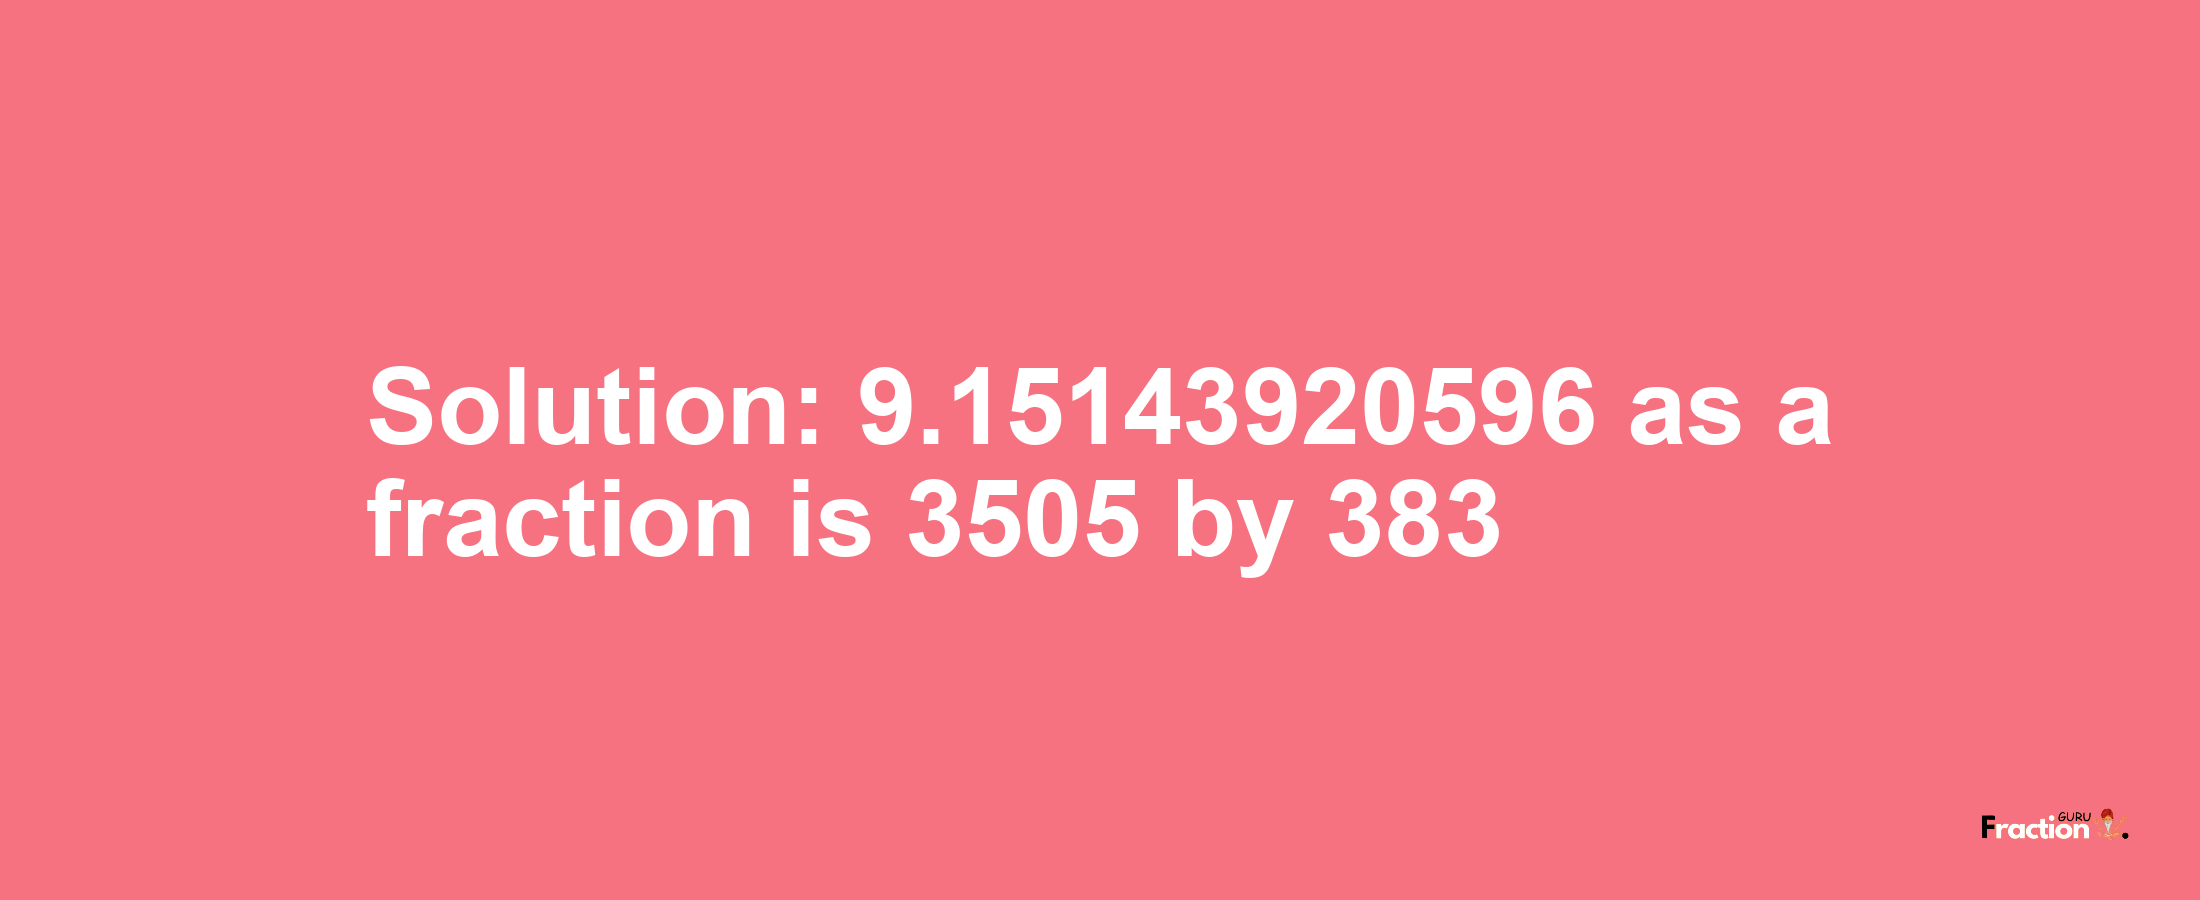 Solution:9.15143920596 as a fraction is 3505/383